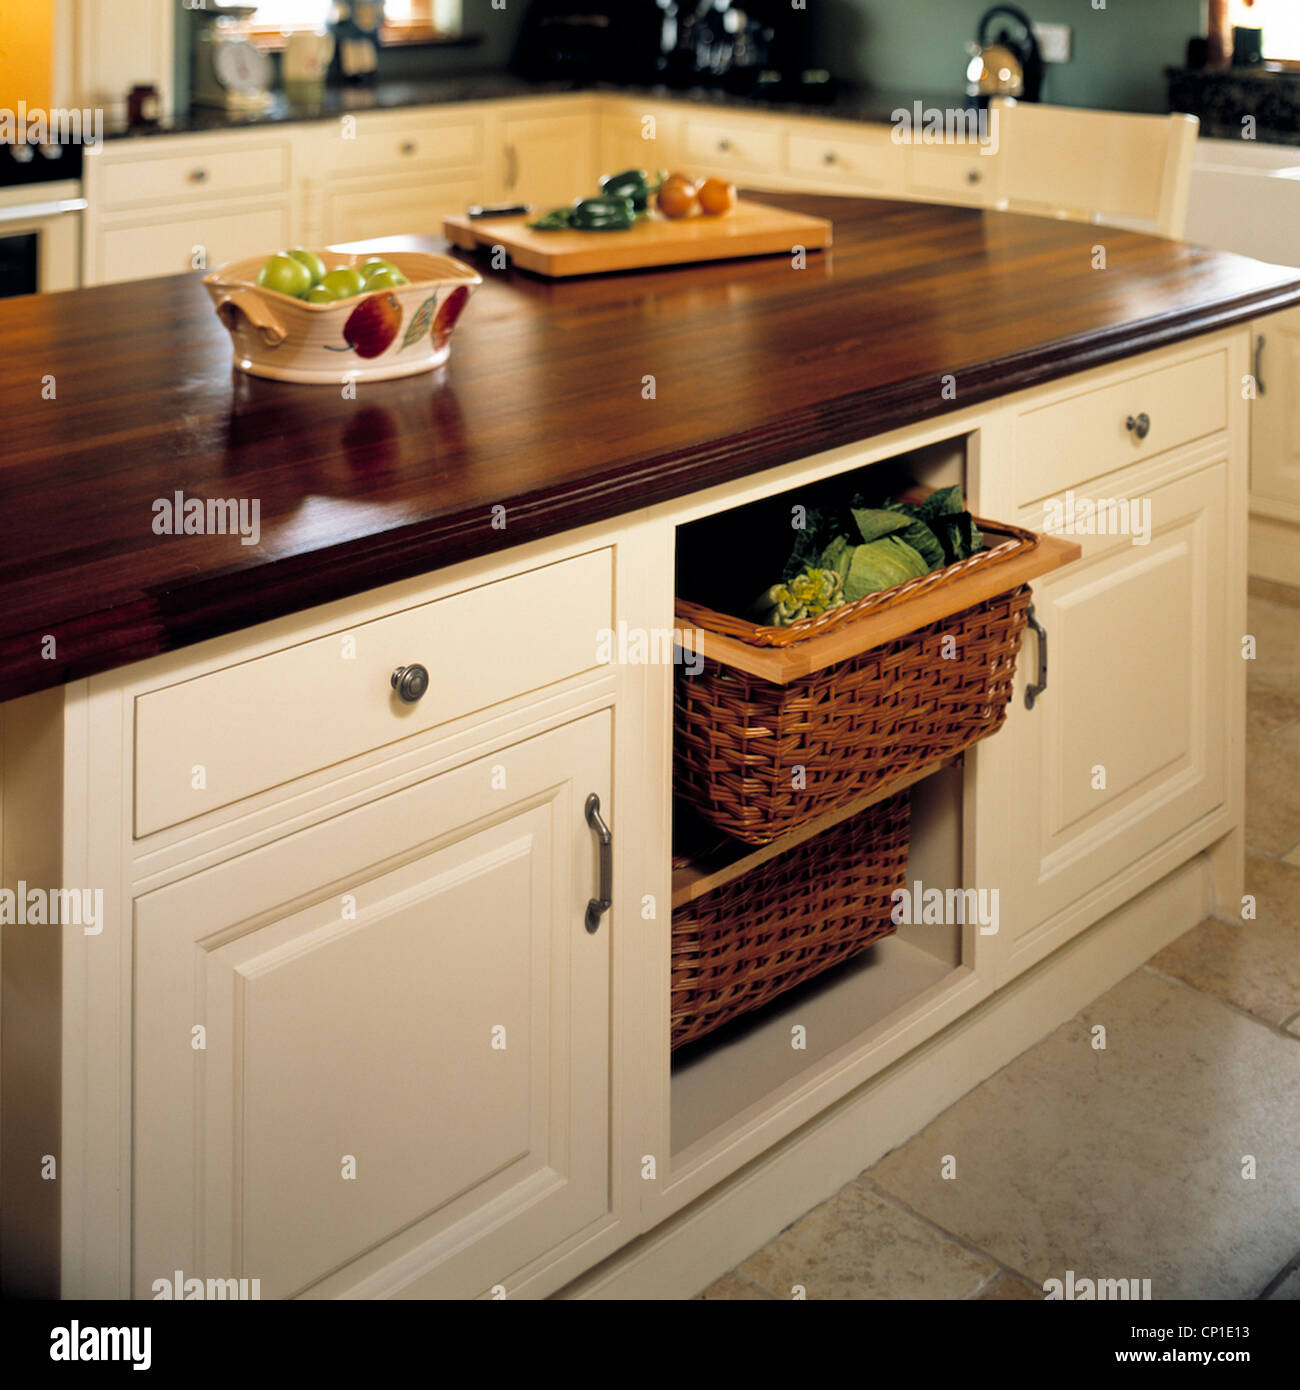 Central island unit breakfast bar in modern country style kitchen Stock Photo